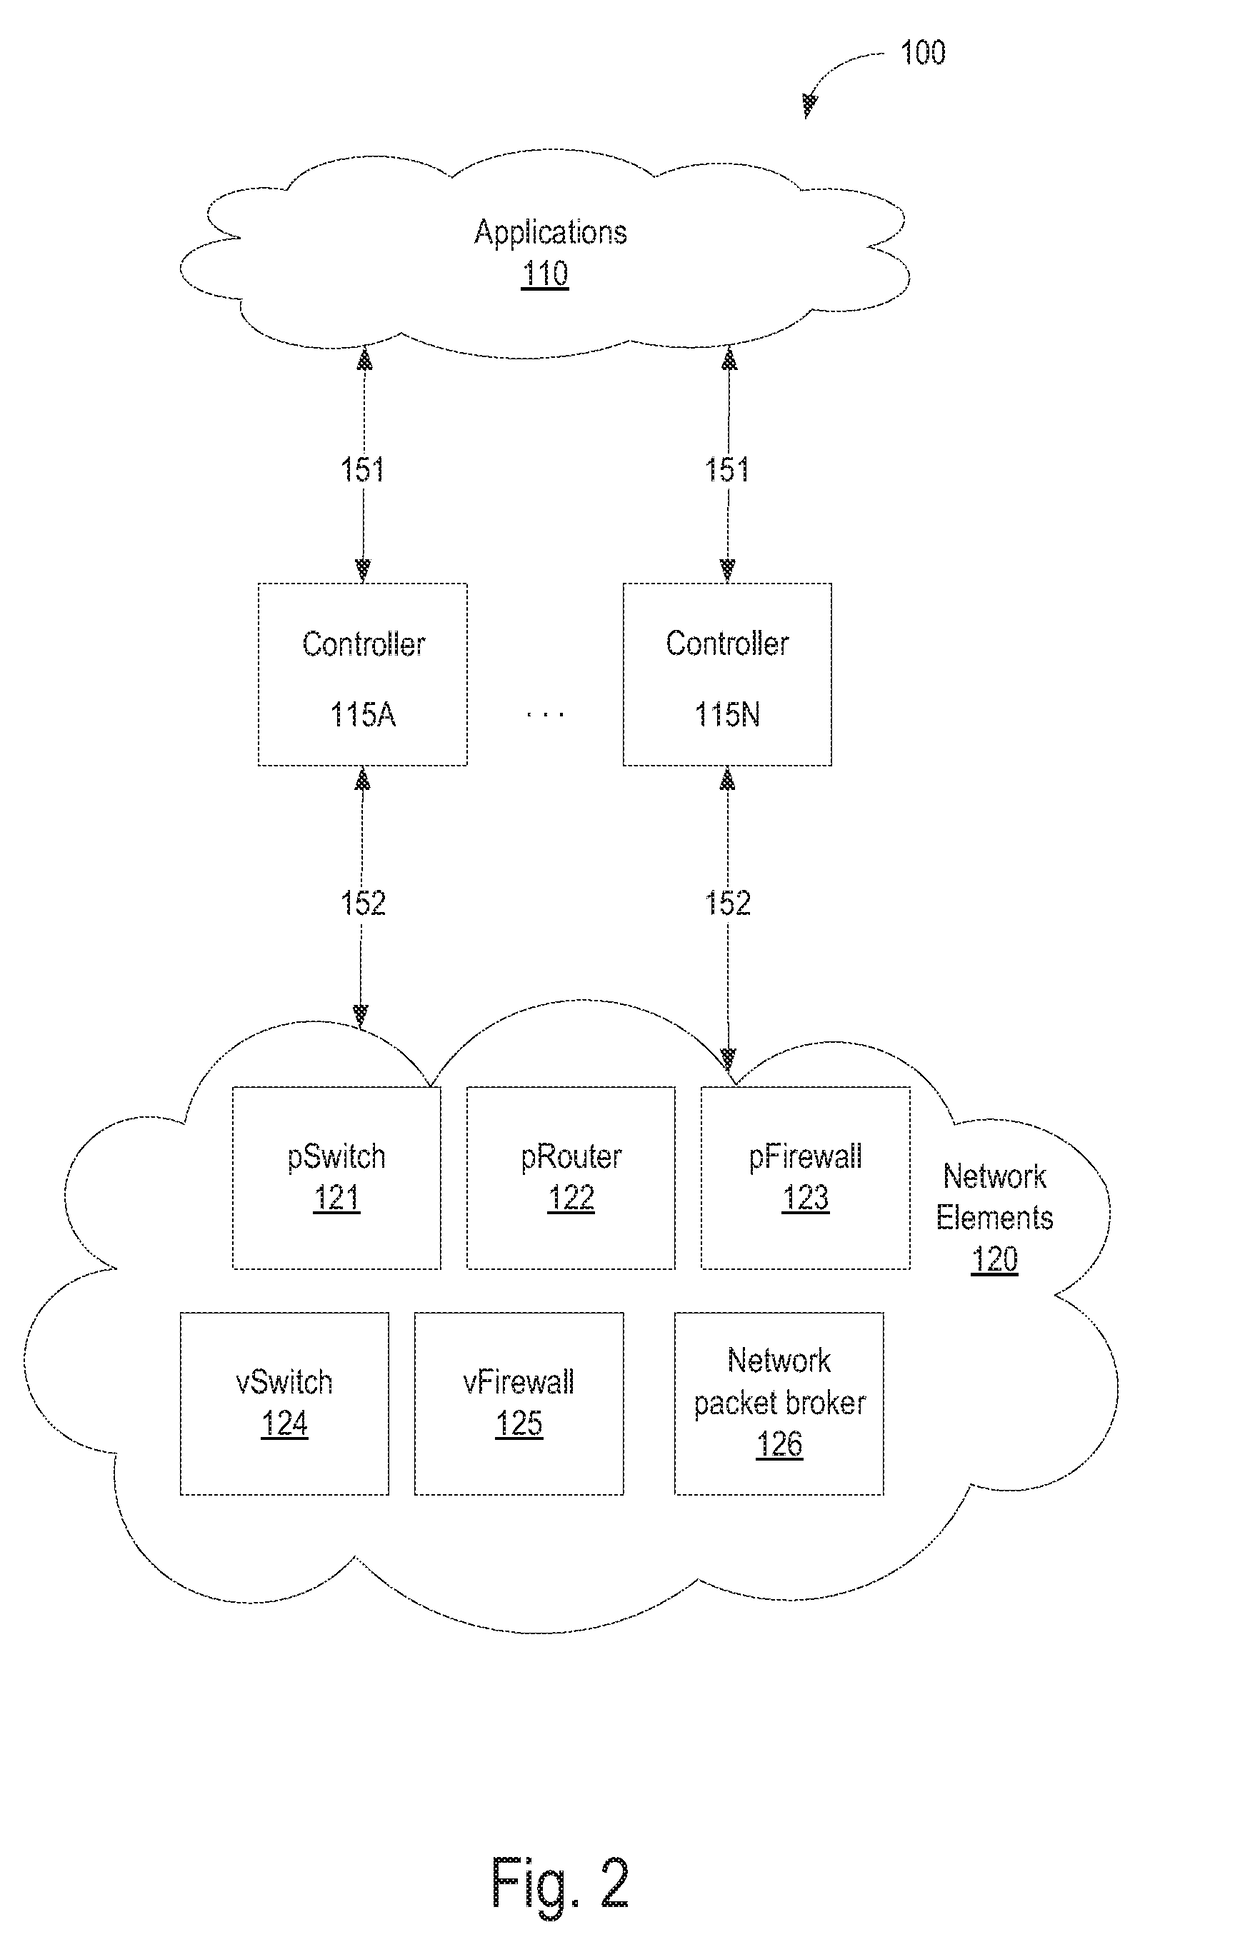 System and method for client network congestion detection, analysis, and management